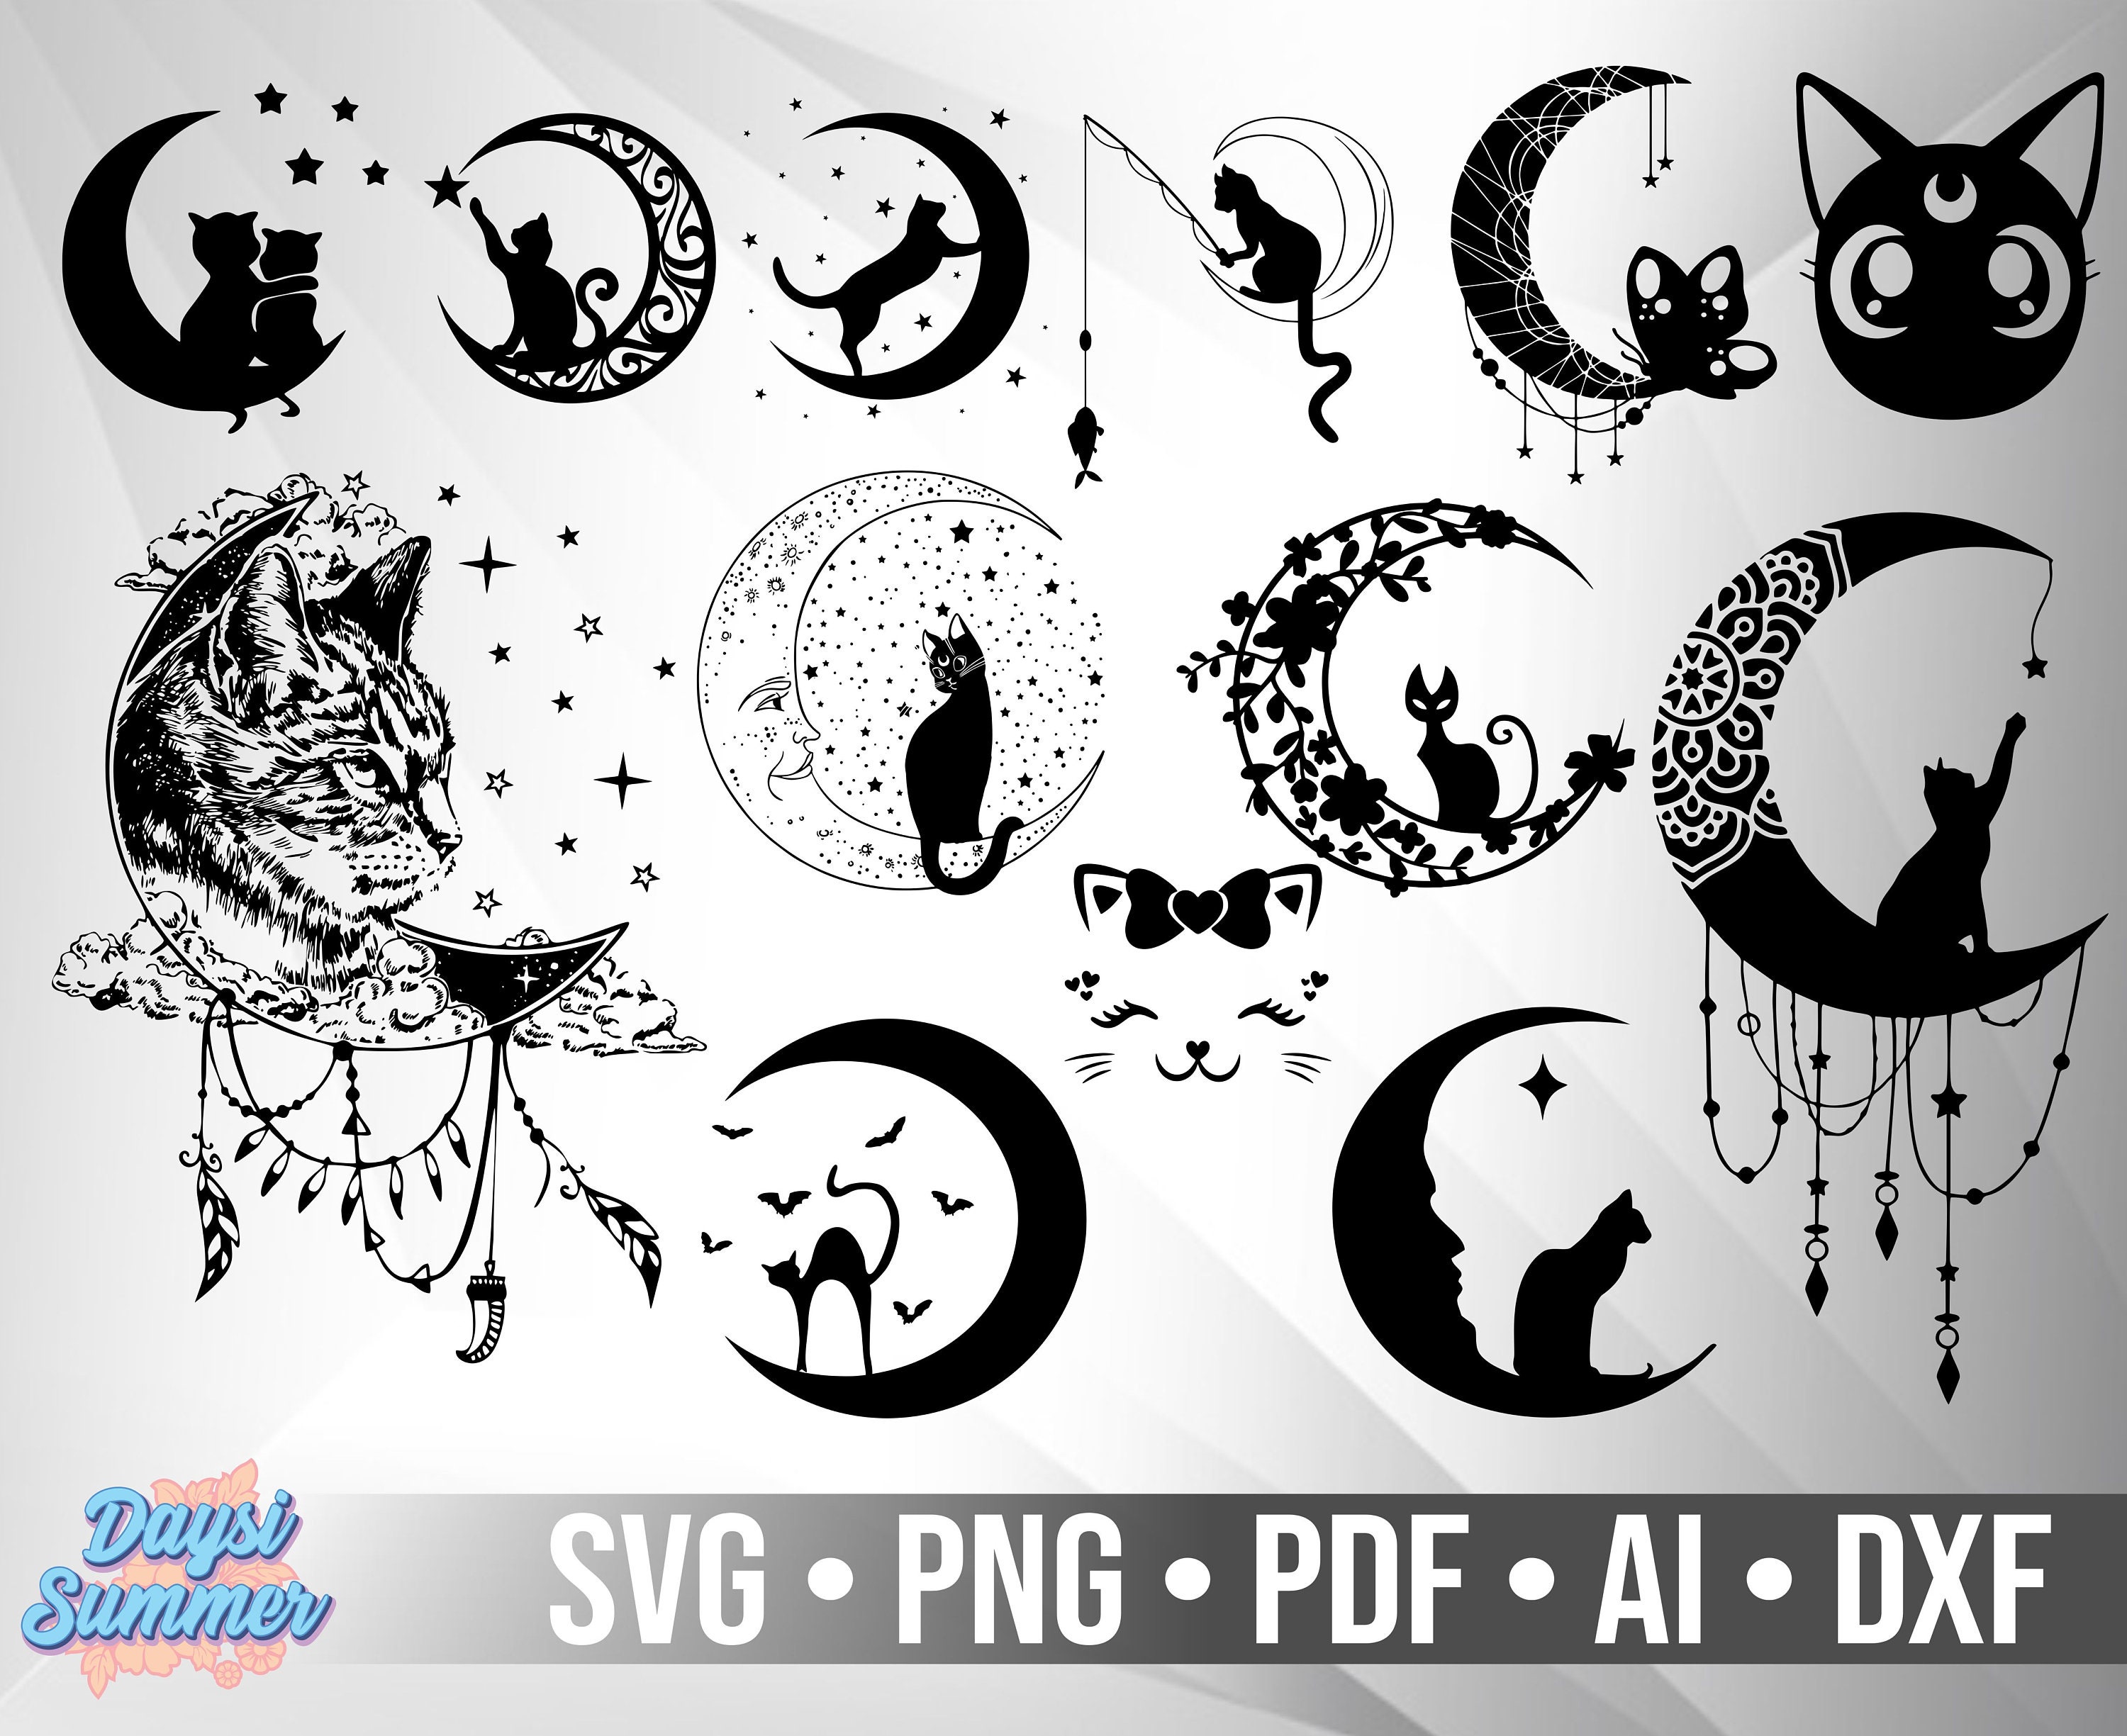 CAT and THE MOON svg png dxf pdf Ai | Etsy